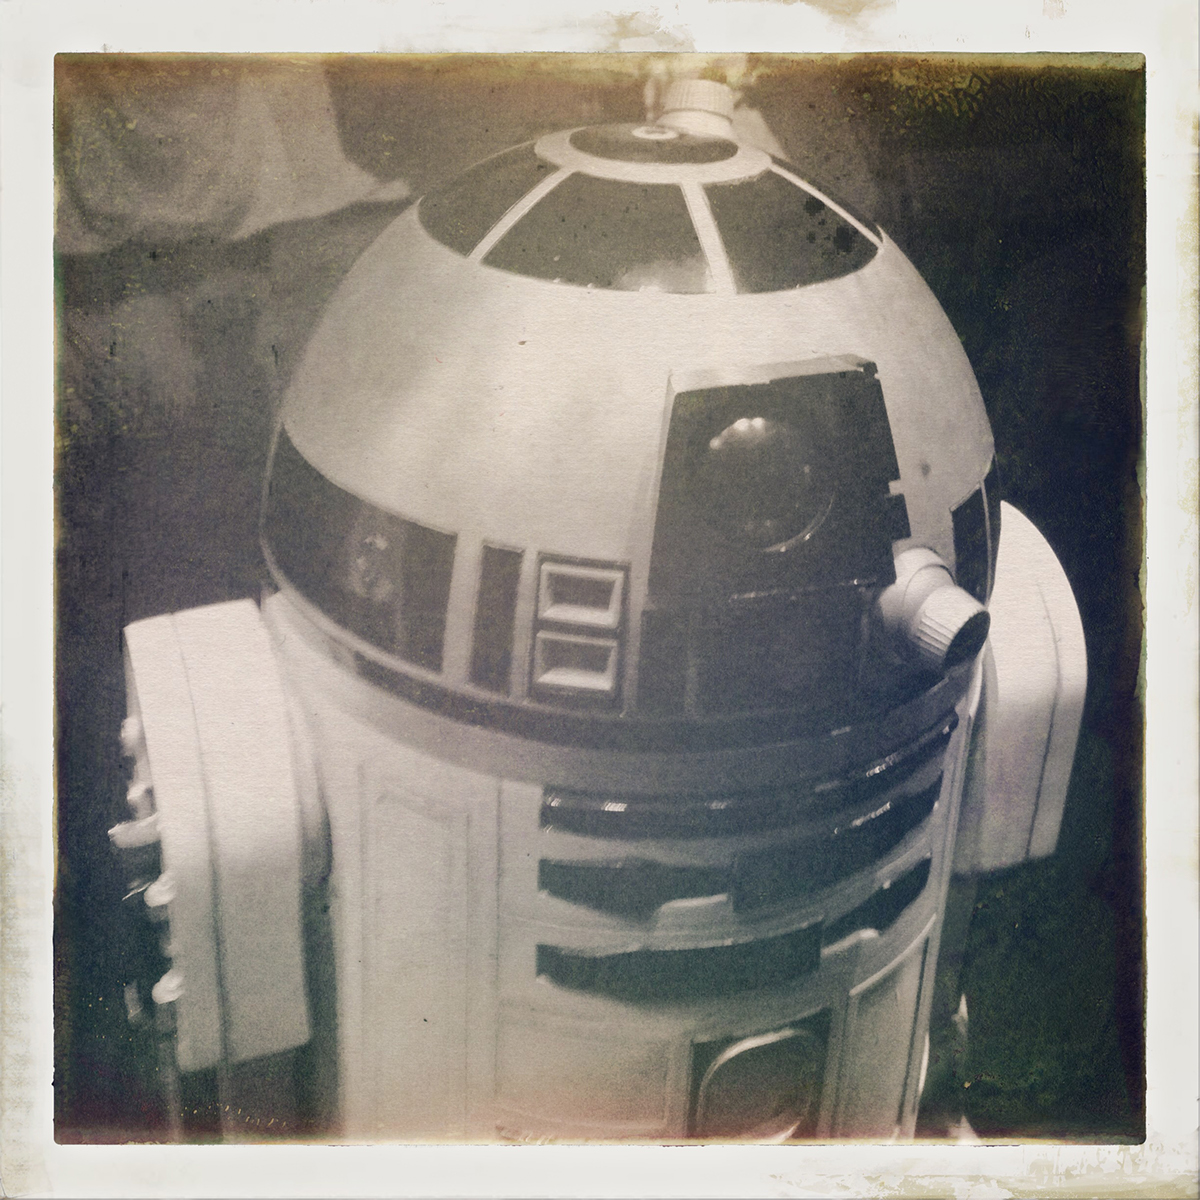 star wars exhibit Tech Museum san jose Hollingsworth iPhoneography digital science fiction vintage where science meets imagination characters